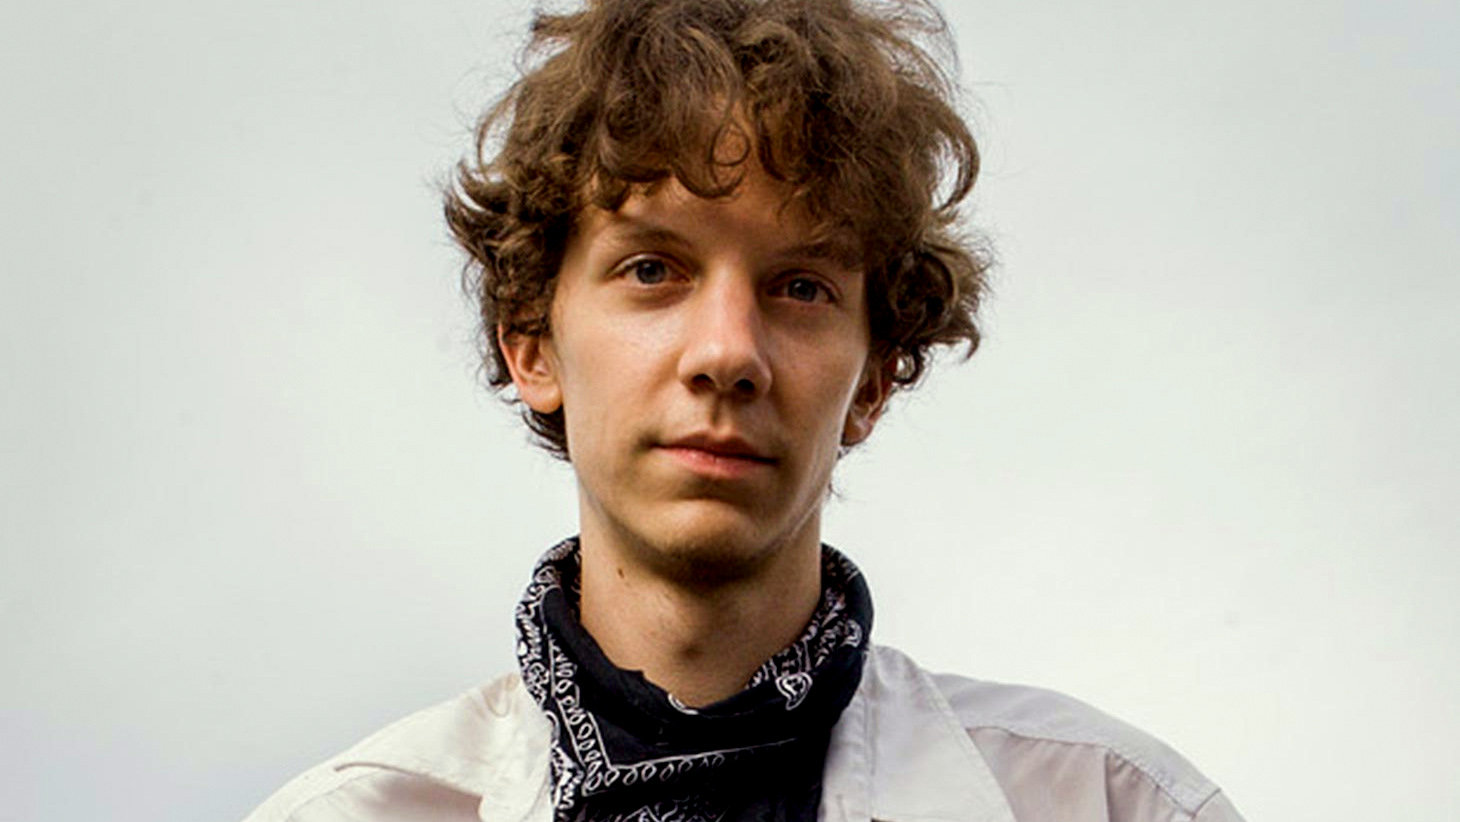 Whistle blower Jeremy Hammond ignored by media